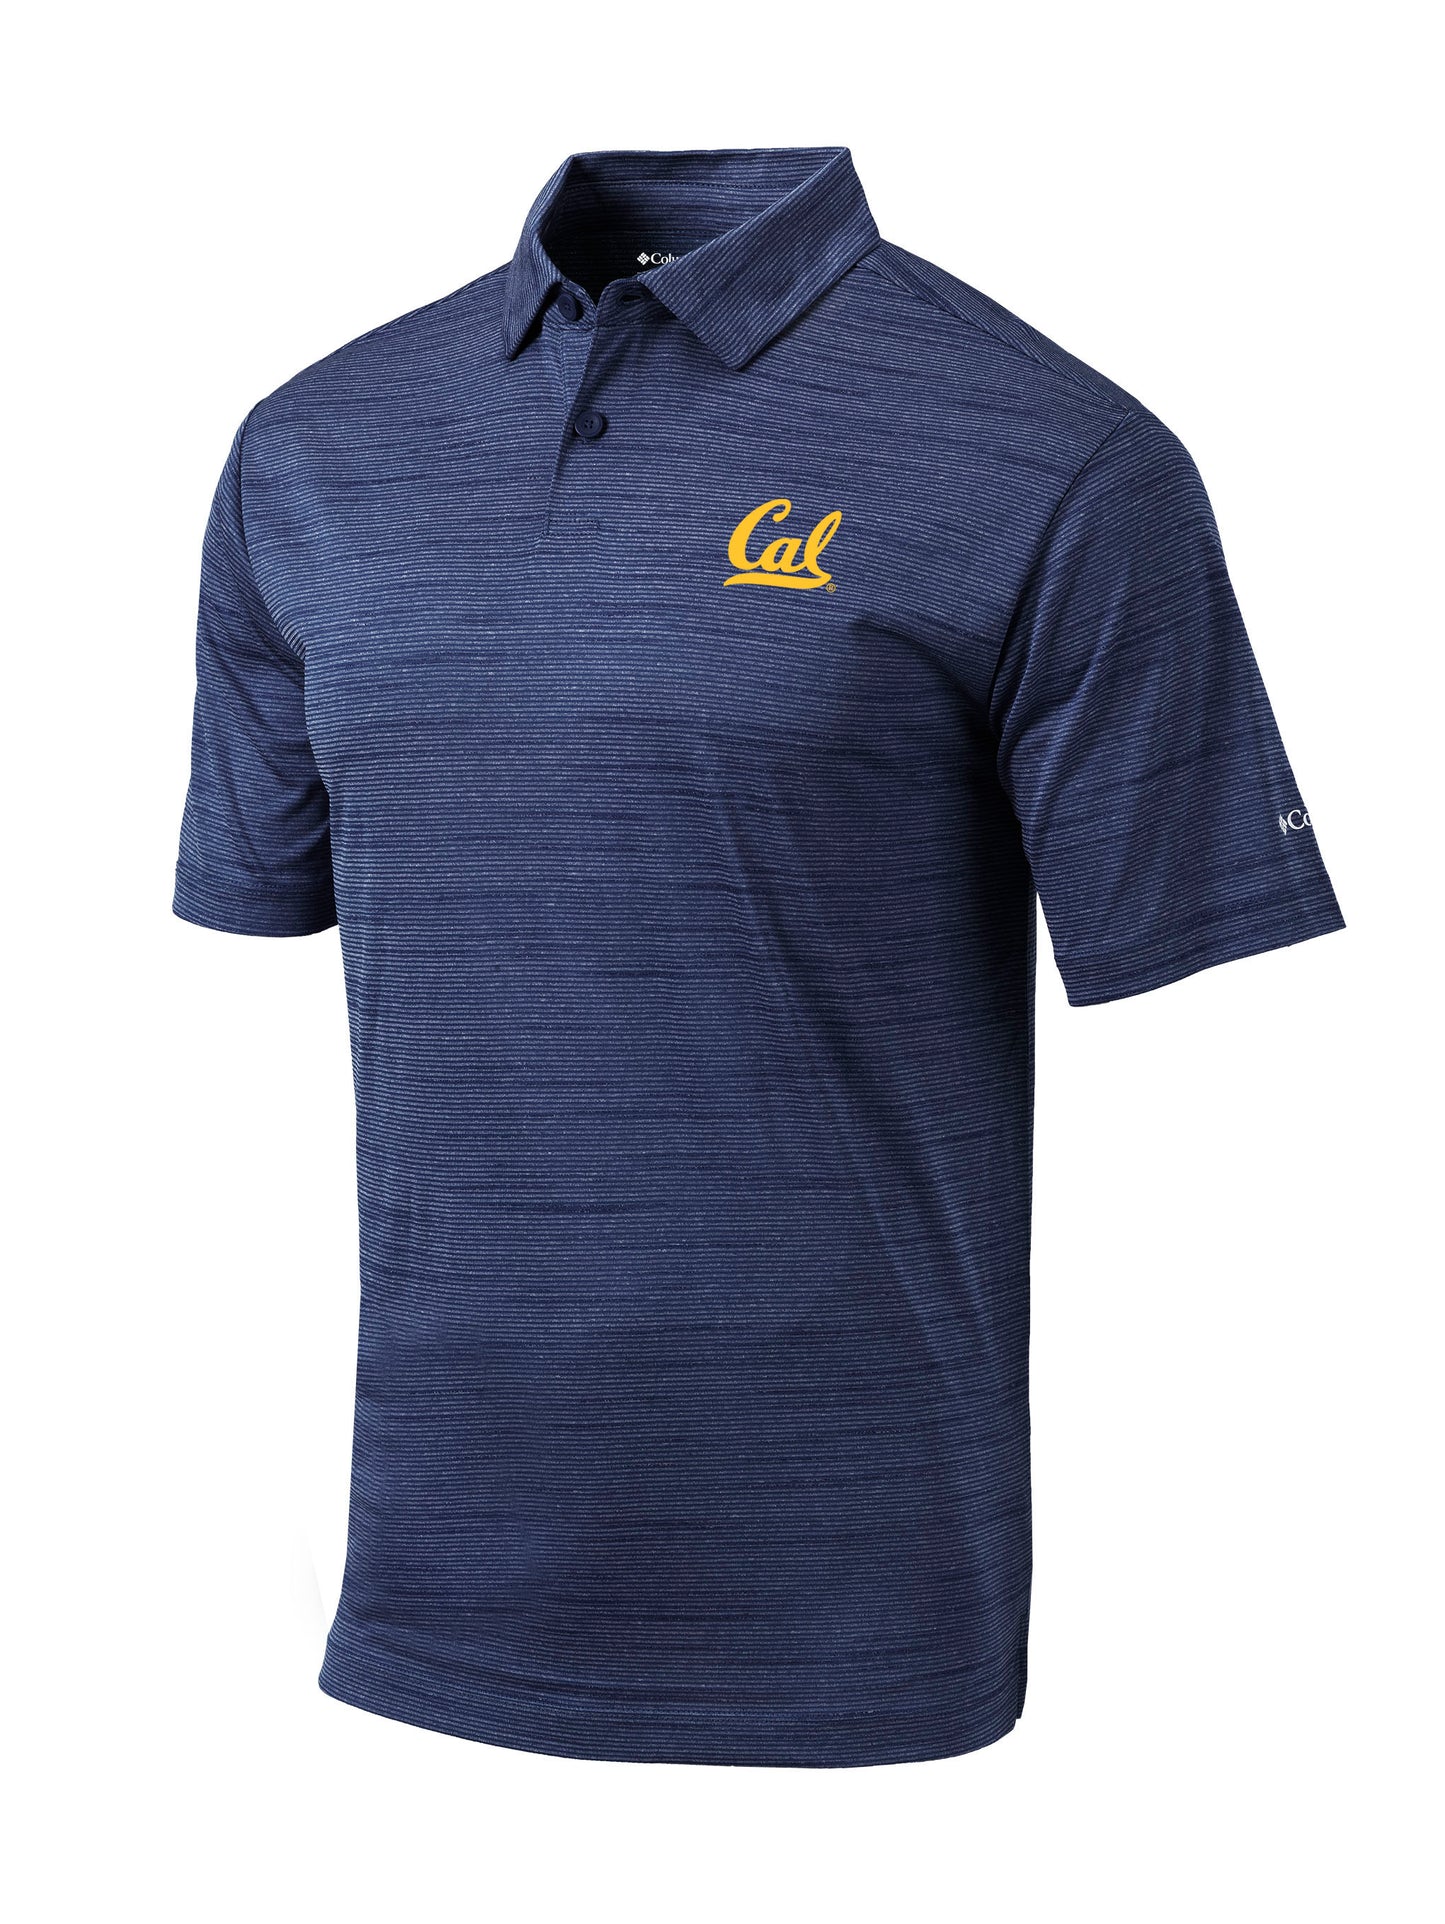 U.C. Berkeley Cal embroidered Columbia moisture wicking polo T-Shirt-Navy-Shop College Wear